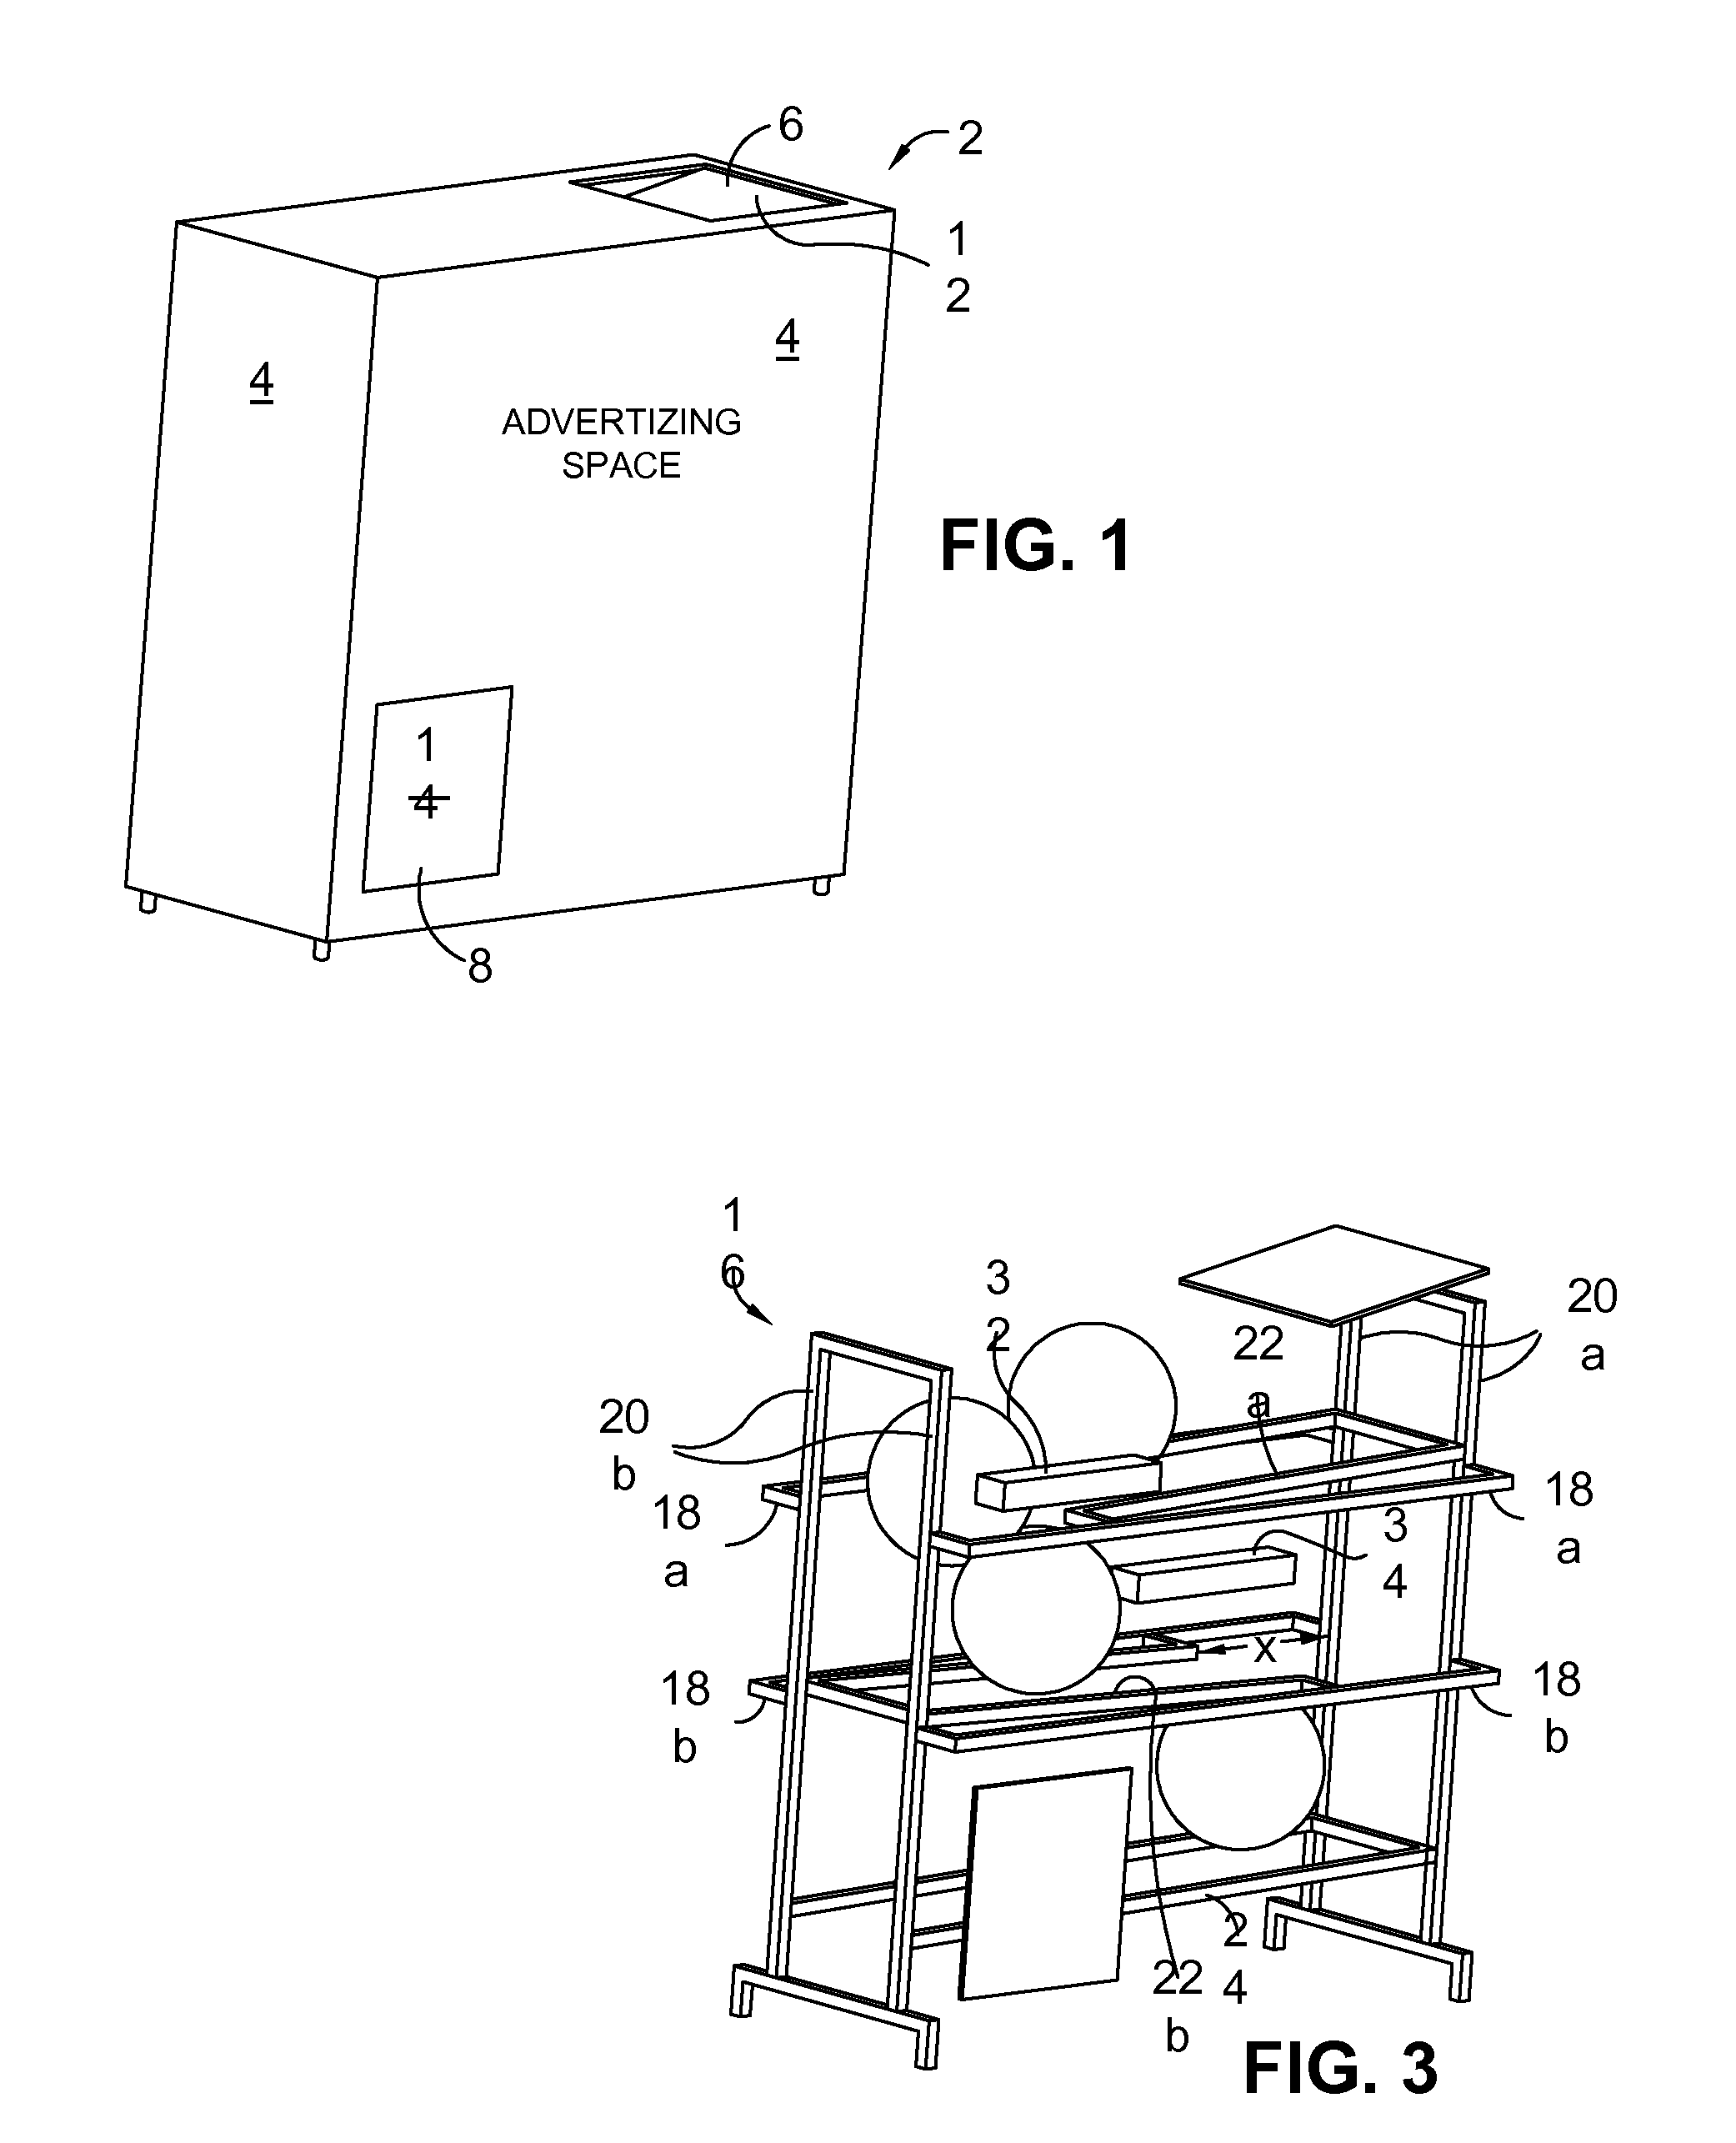 Method and apparatus for sanitizing sports implements and balls